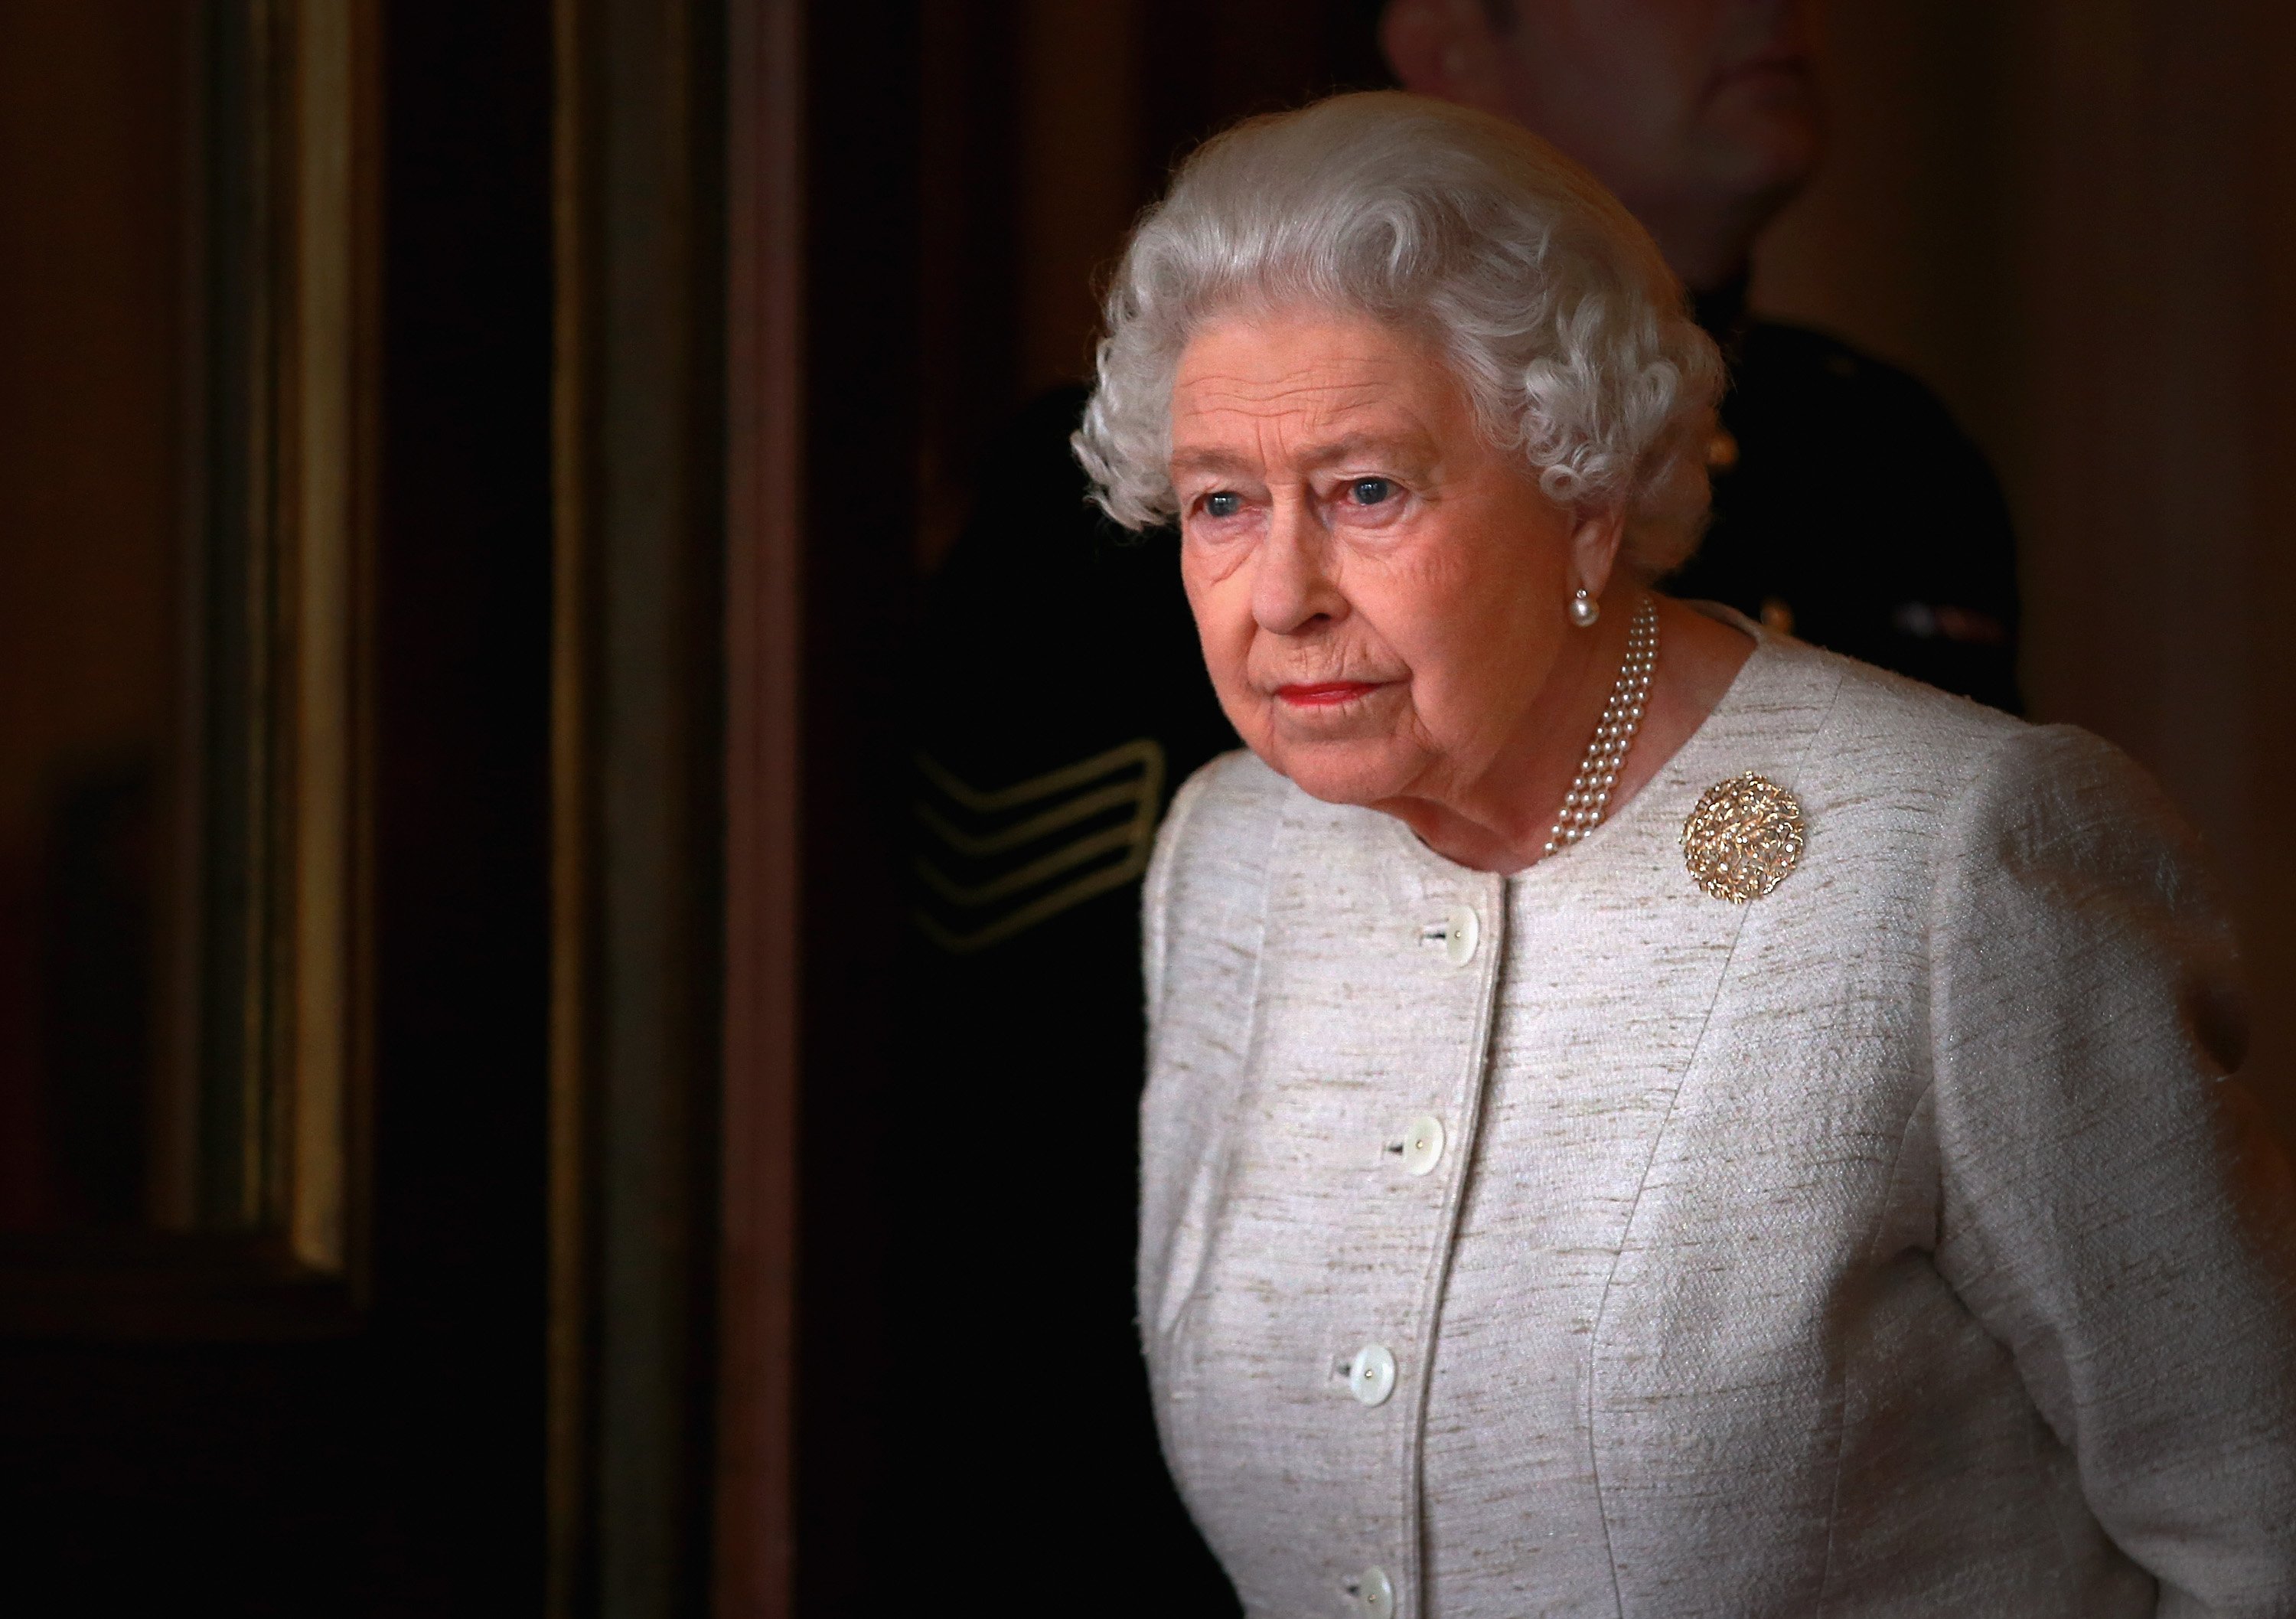 Queen Elizabeth II wears a white suit while waiting at Buckingham Palace.